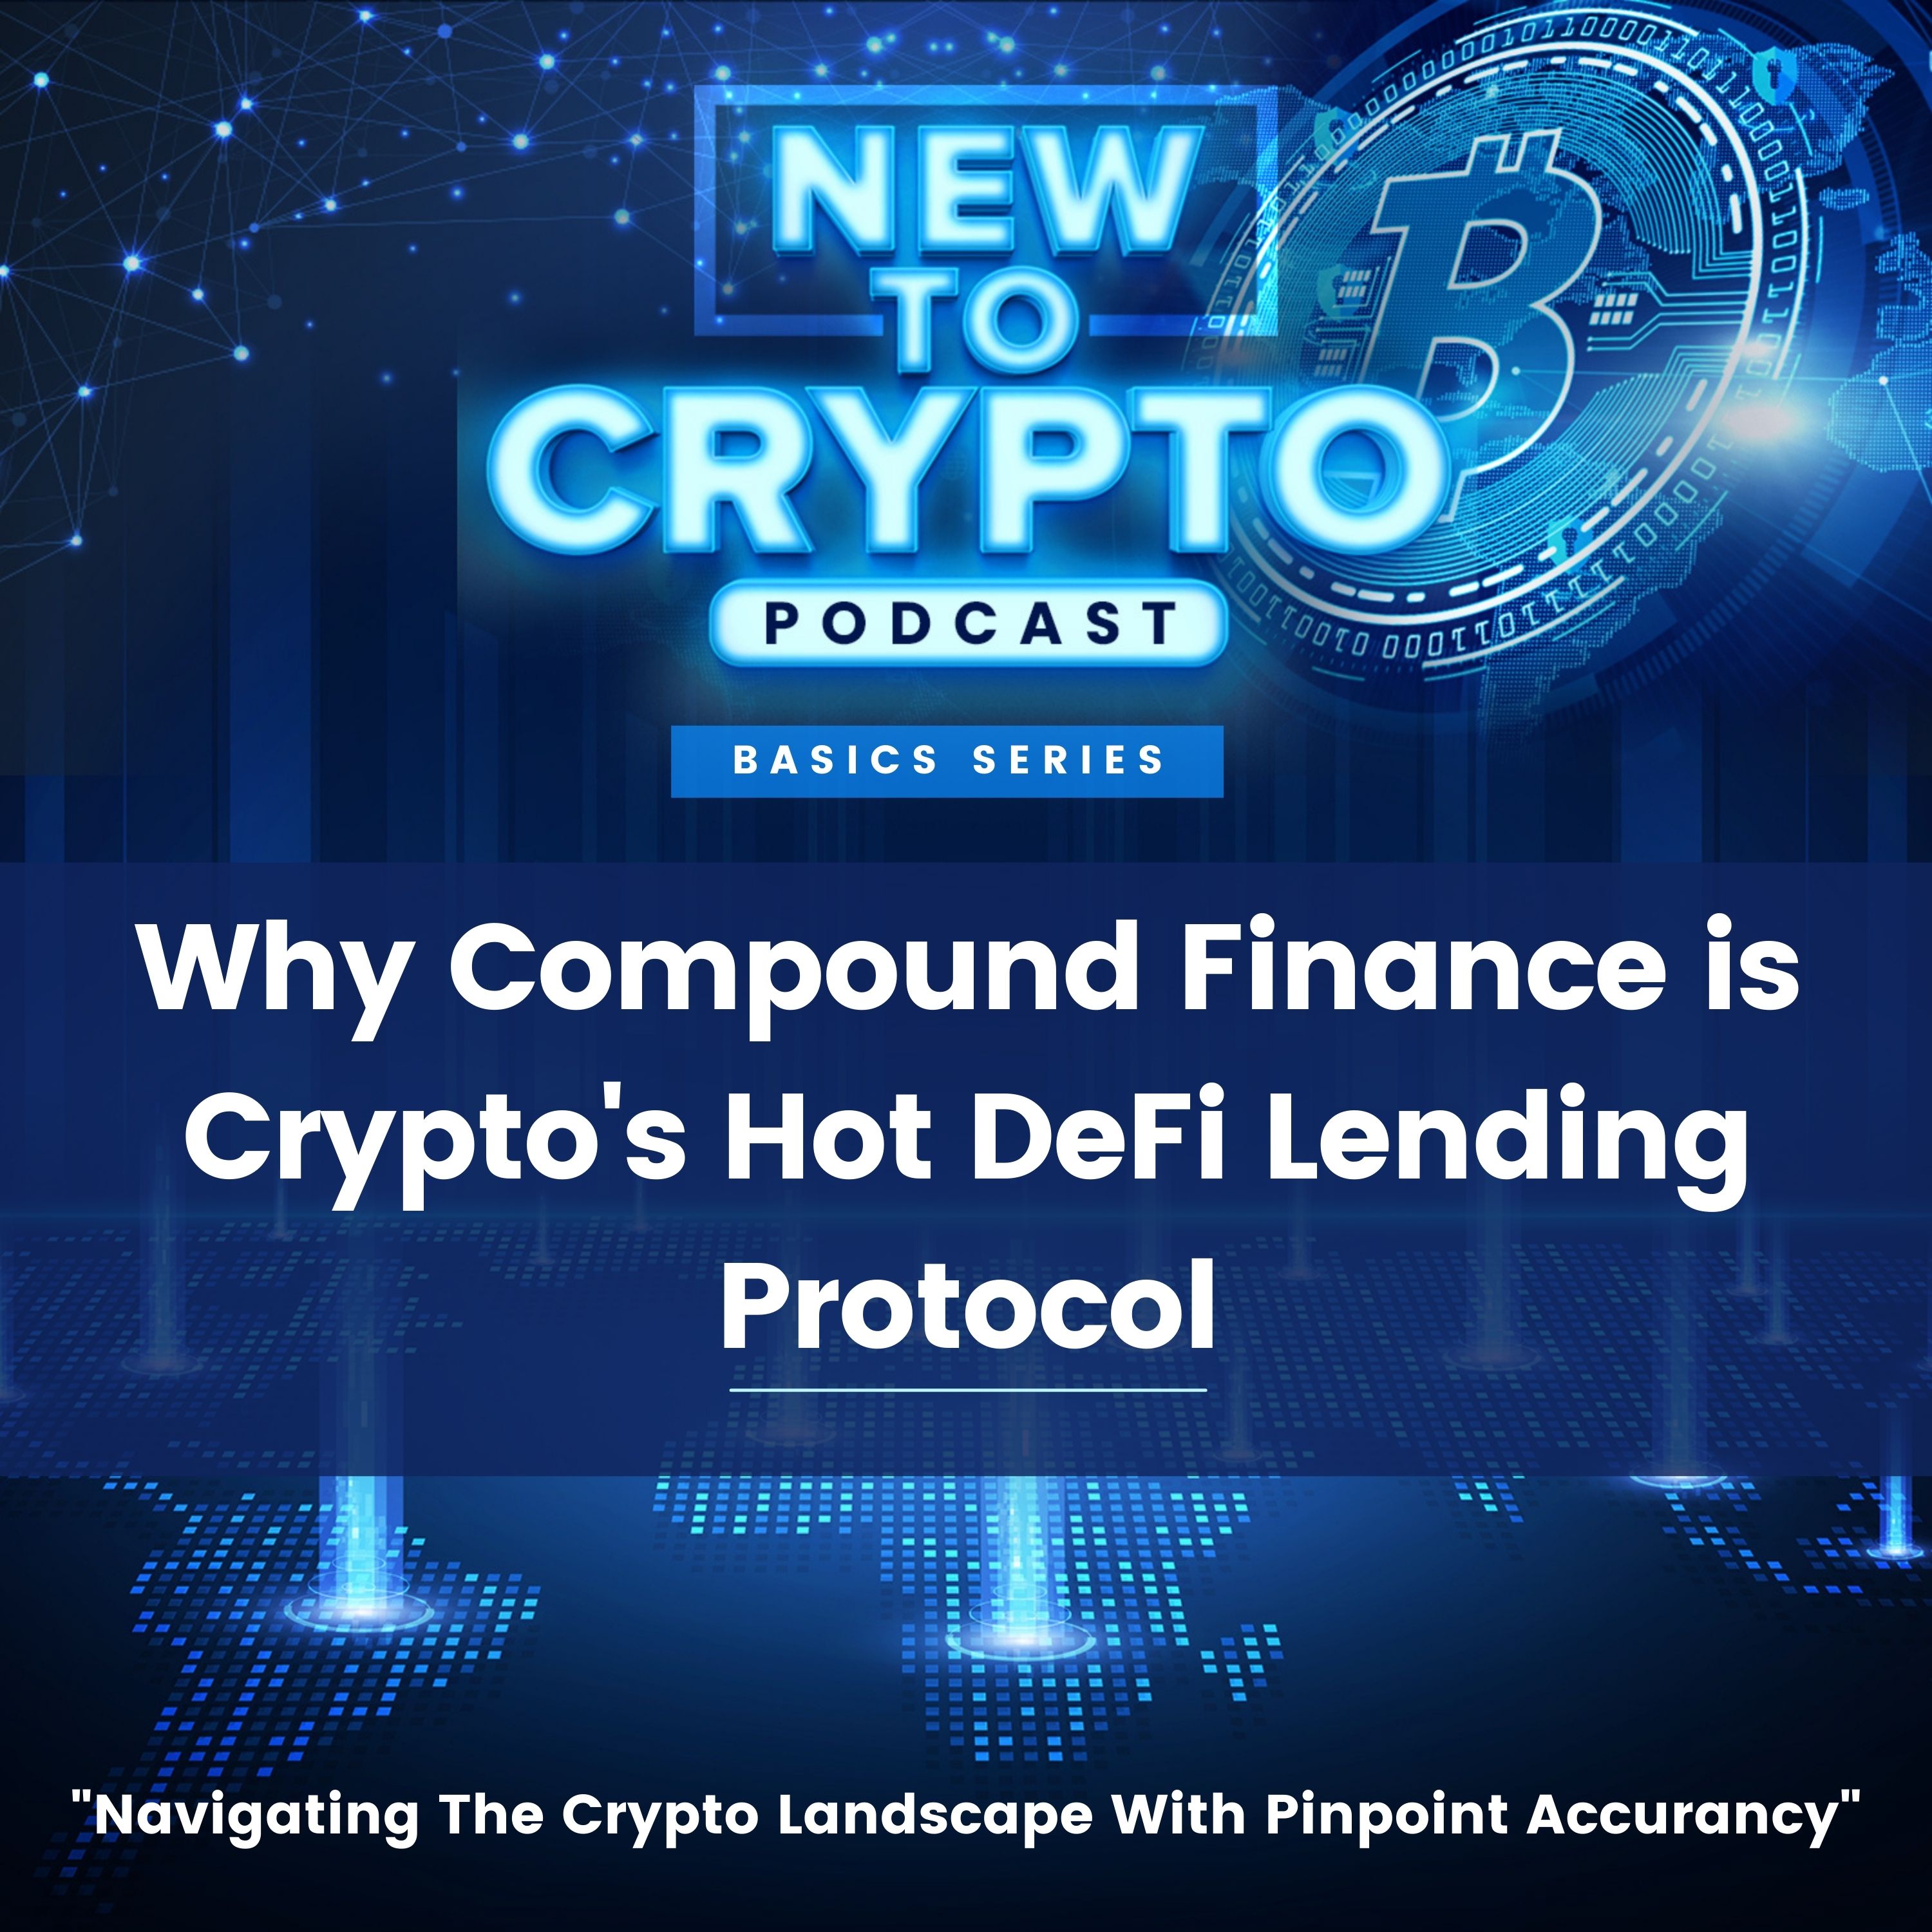 Why Compound Finance is Crypto's Hot DeFi Lending Protocol